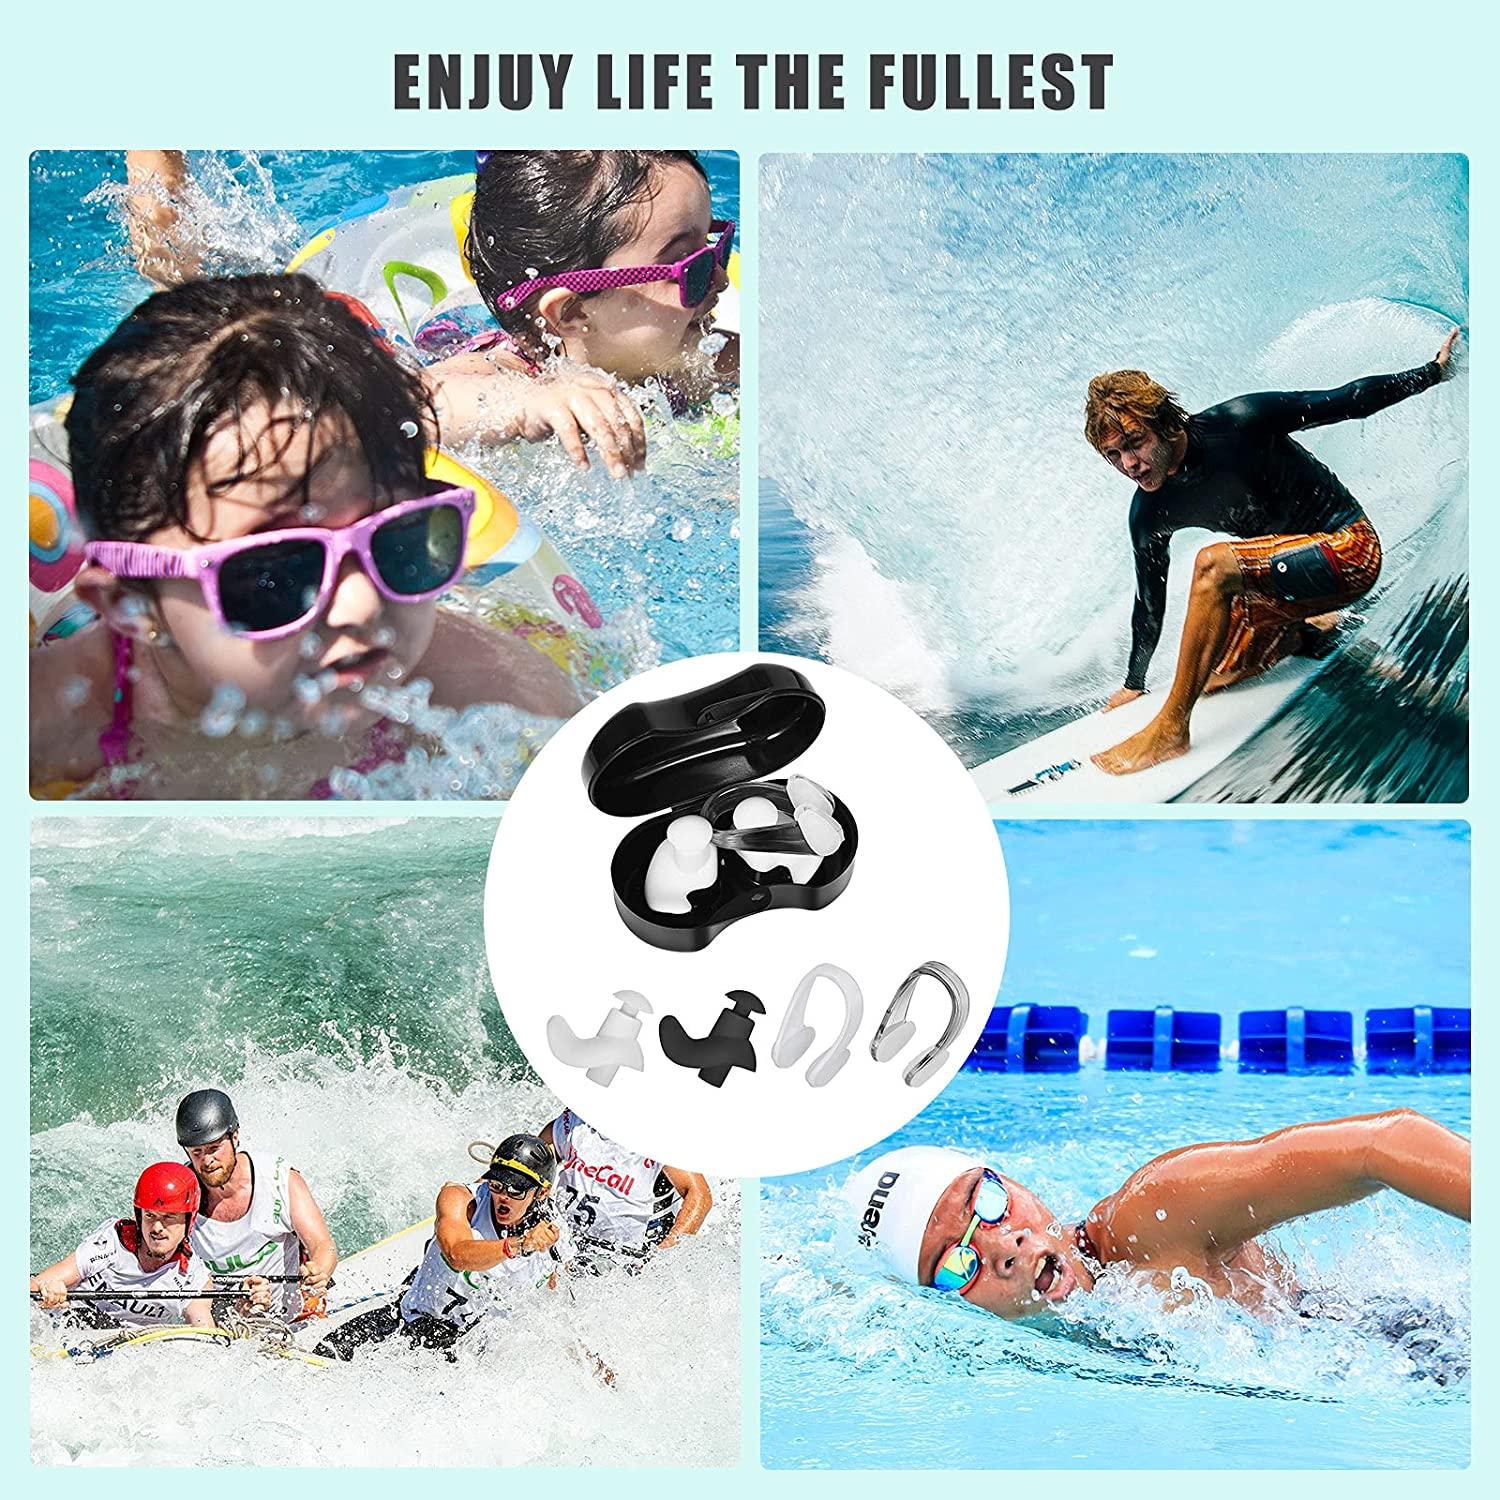 Swimming Earplugs Soft Silicone Environment-Friendly | Swimming Accessories for Kids and Adults - dealskart.com.au